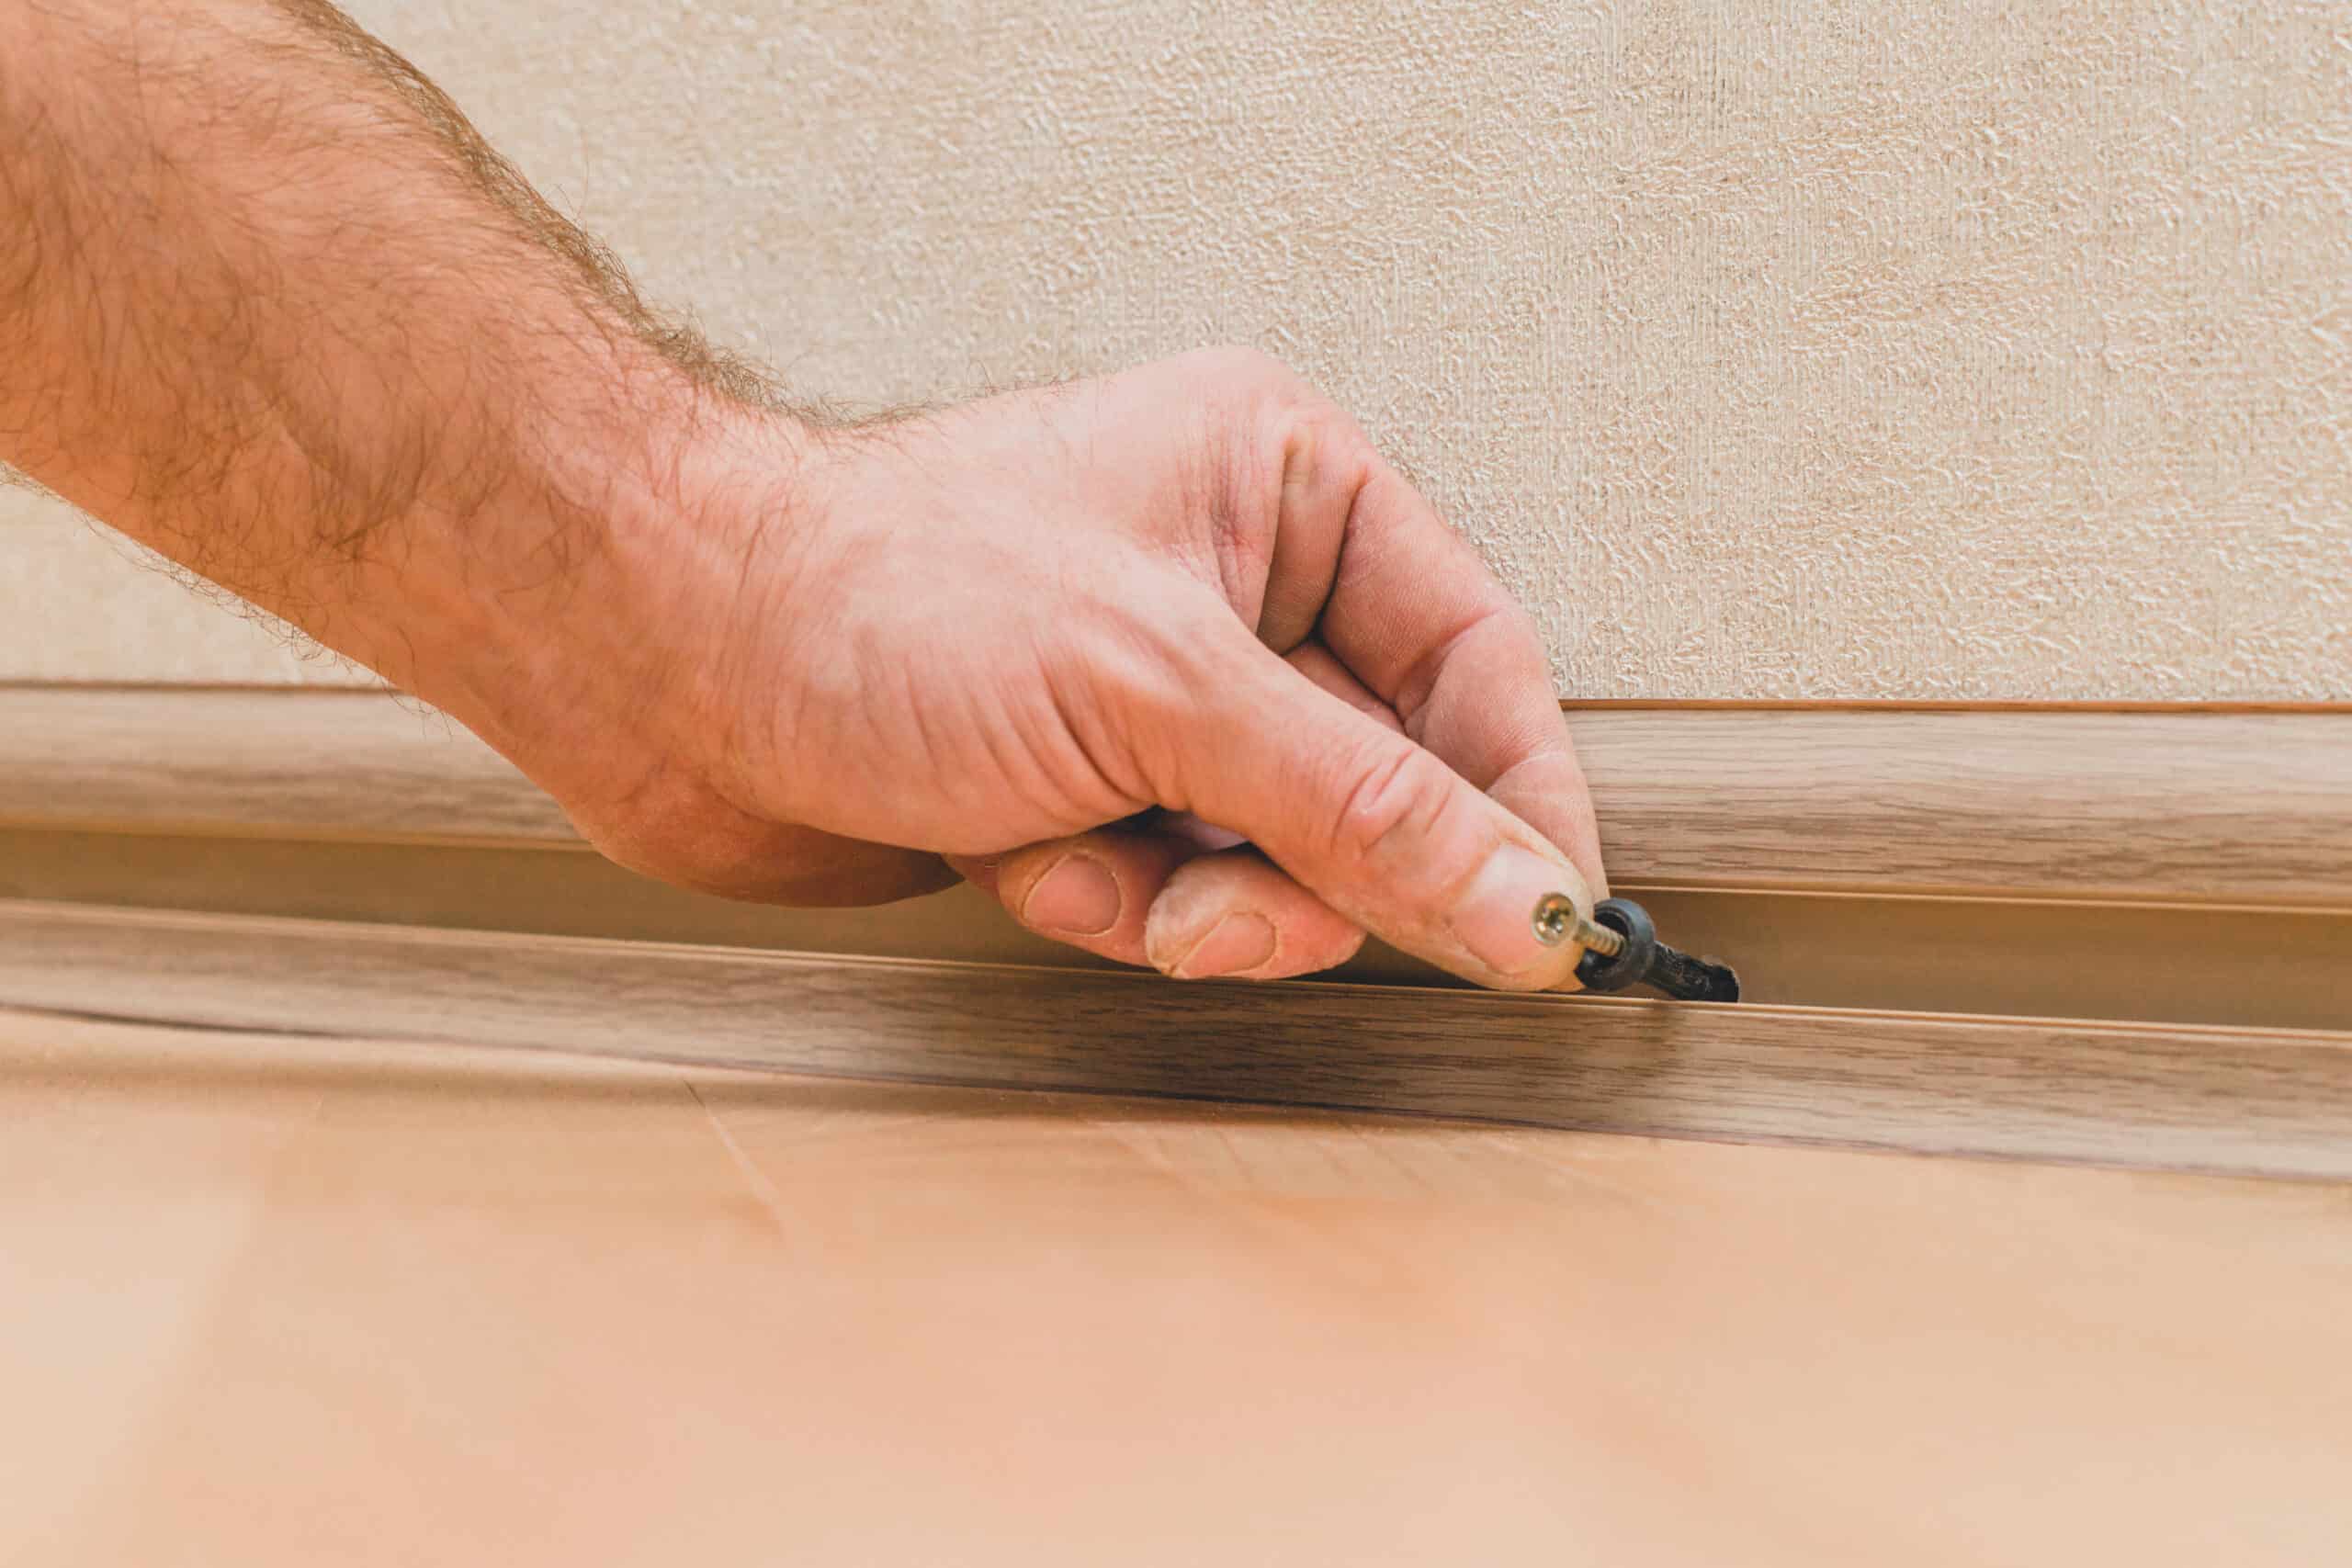 How To Sand Baseboards